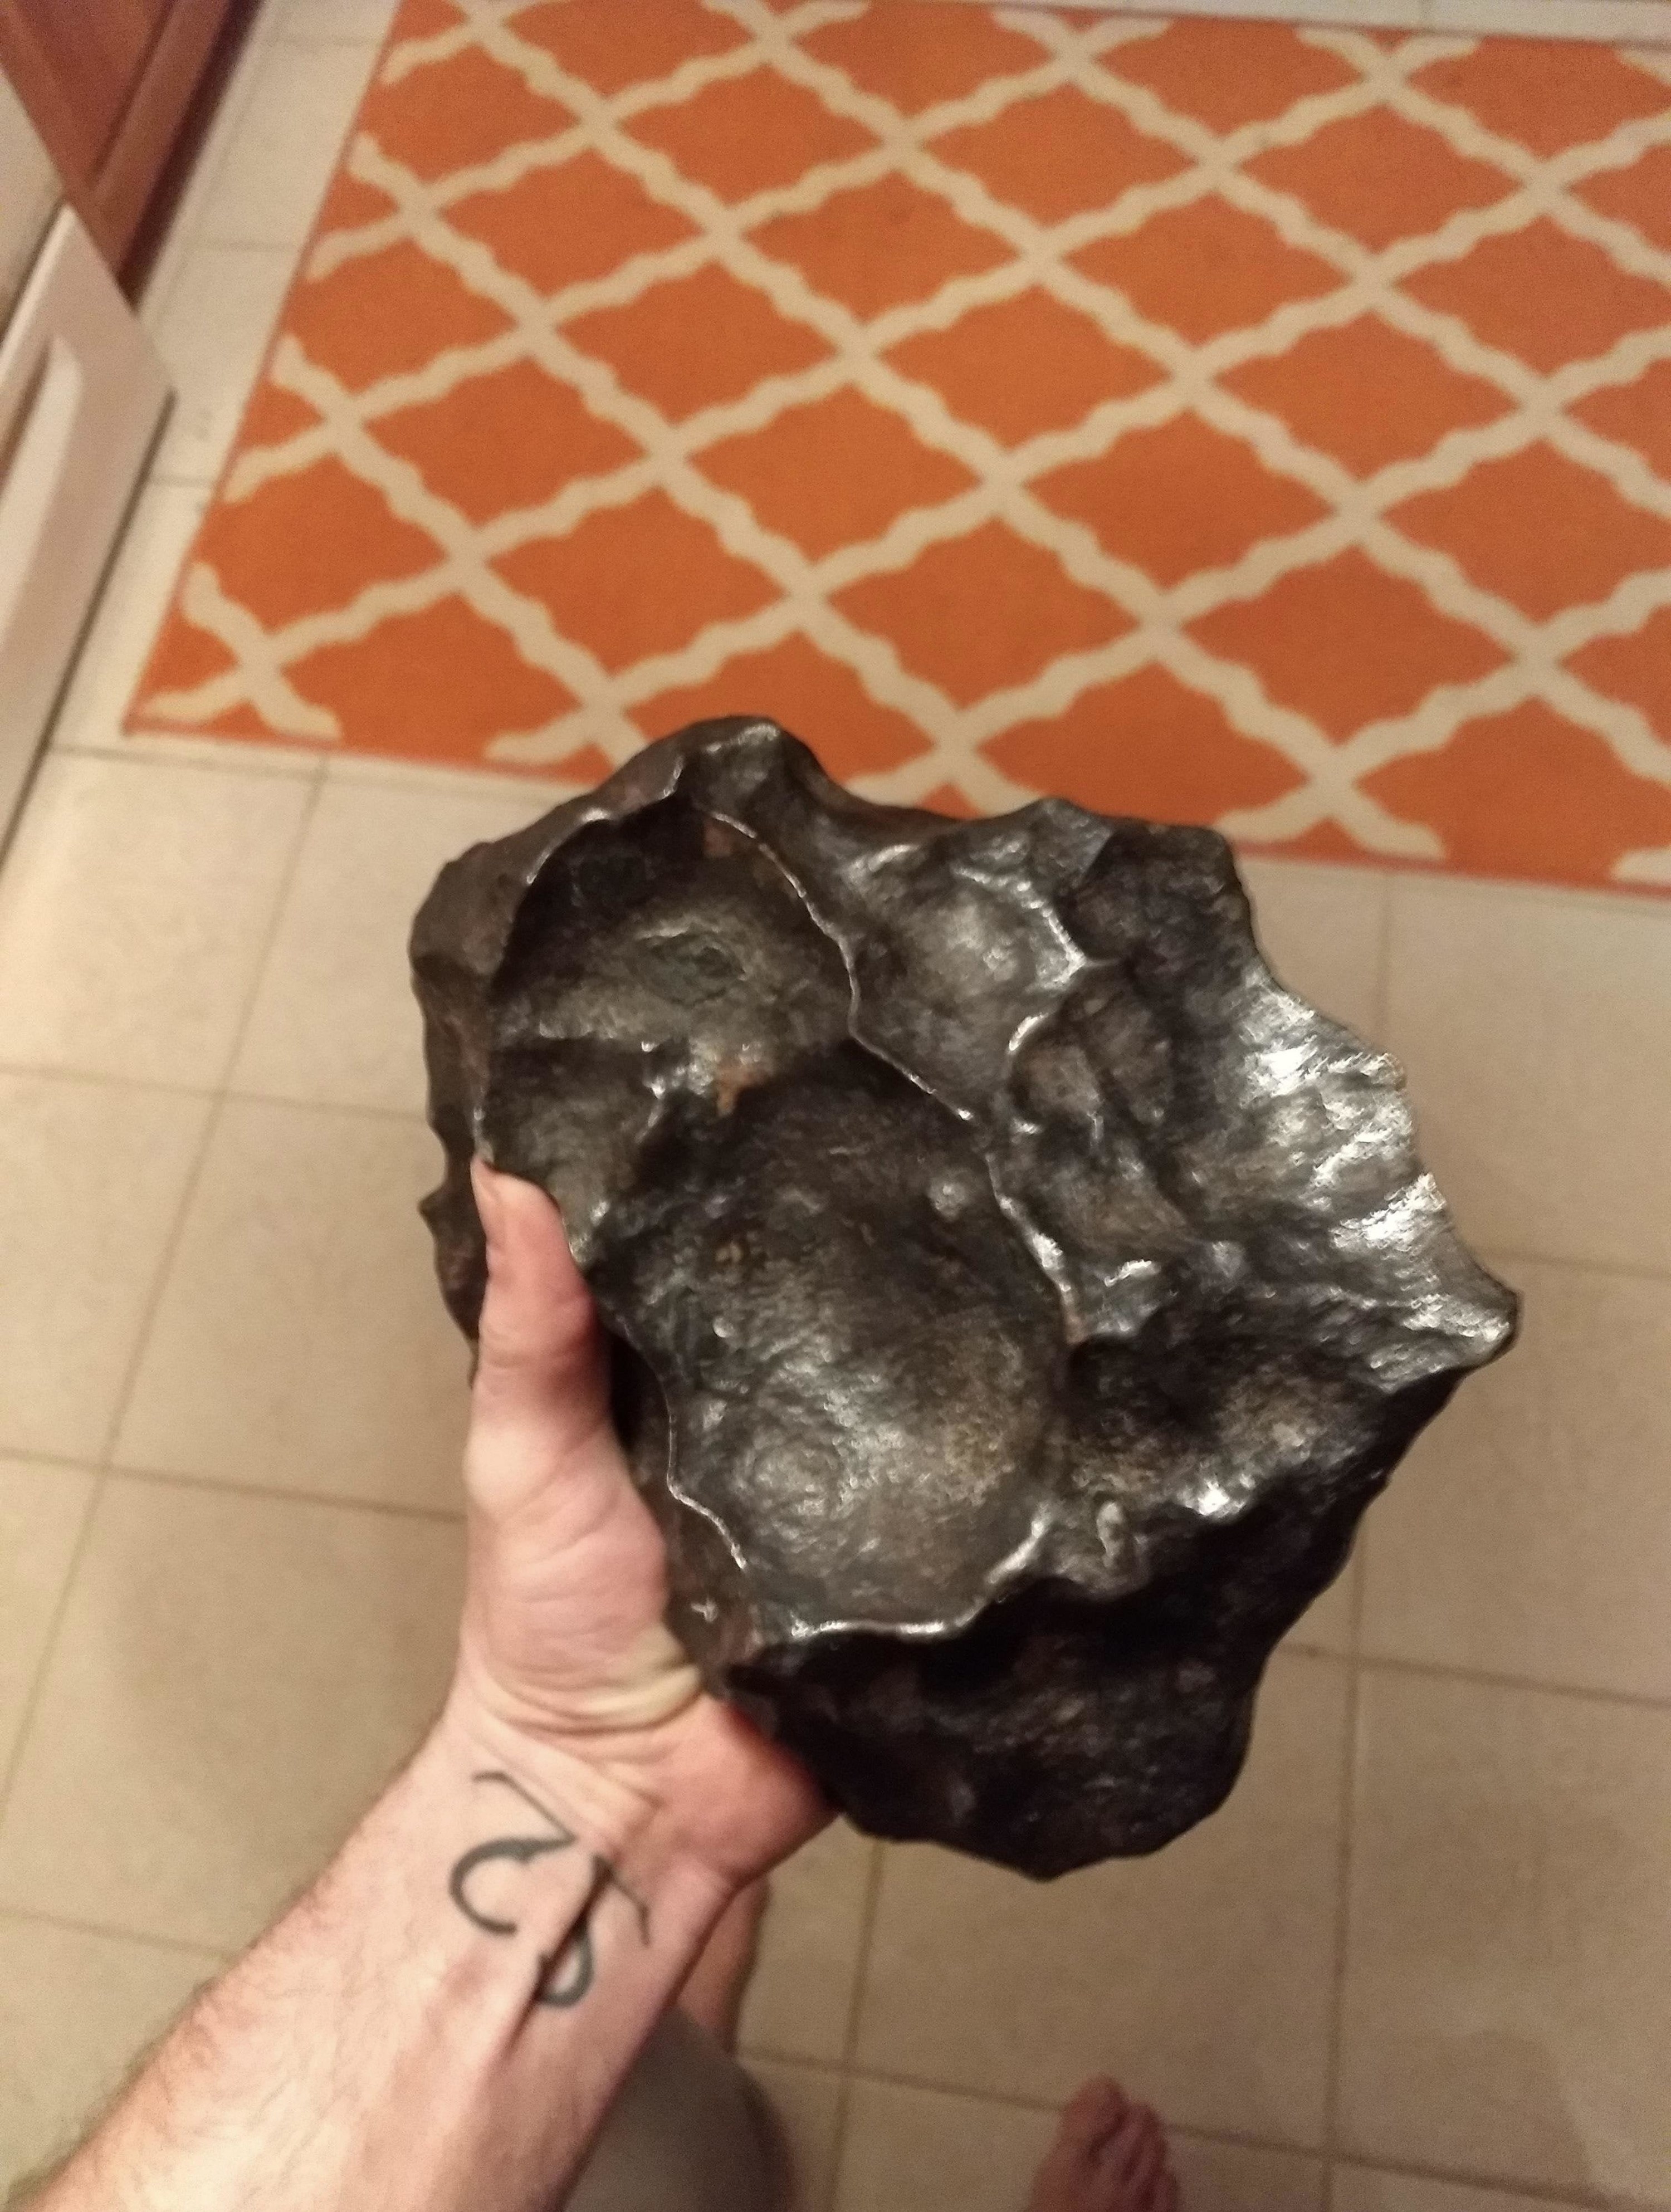 A person holding a chunk of rock/metal